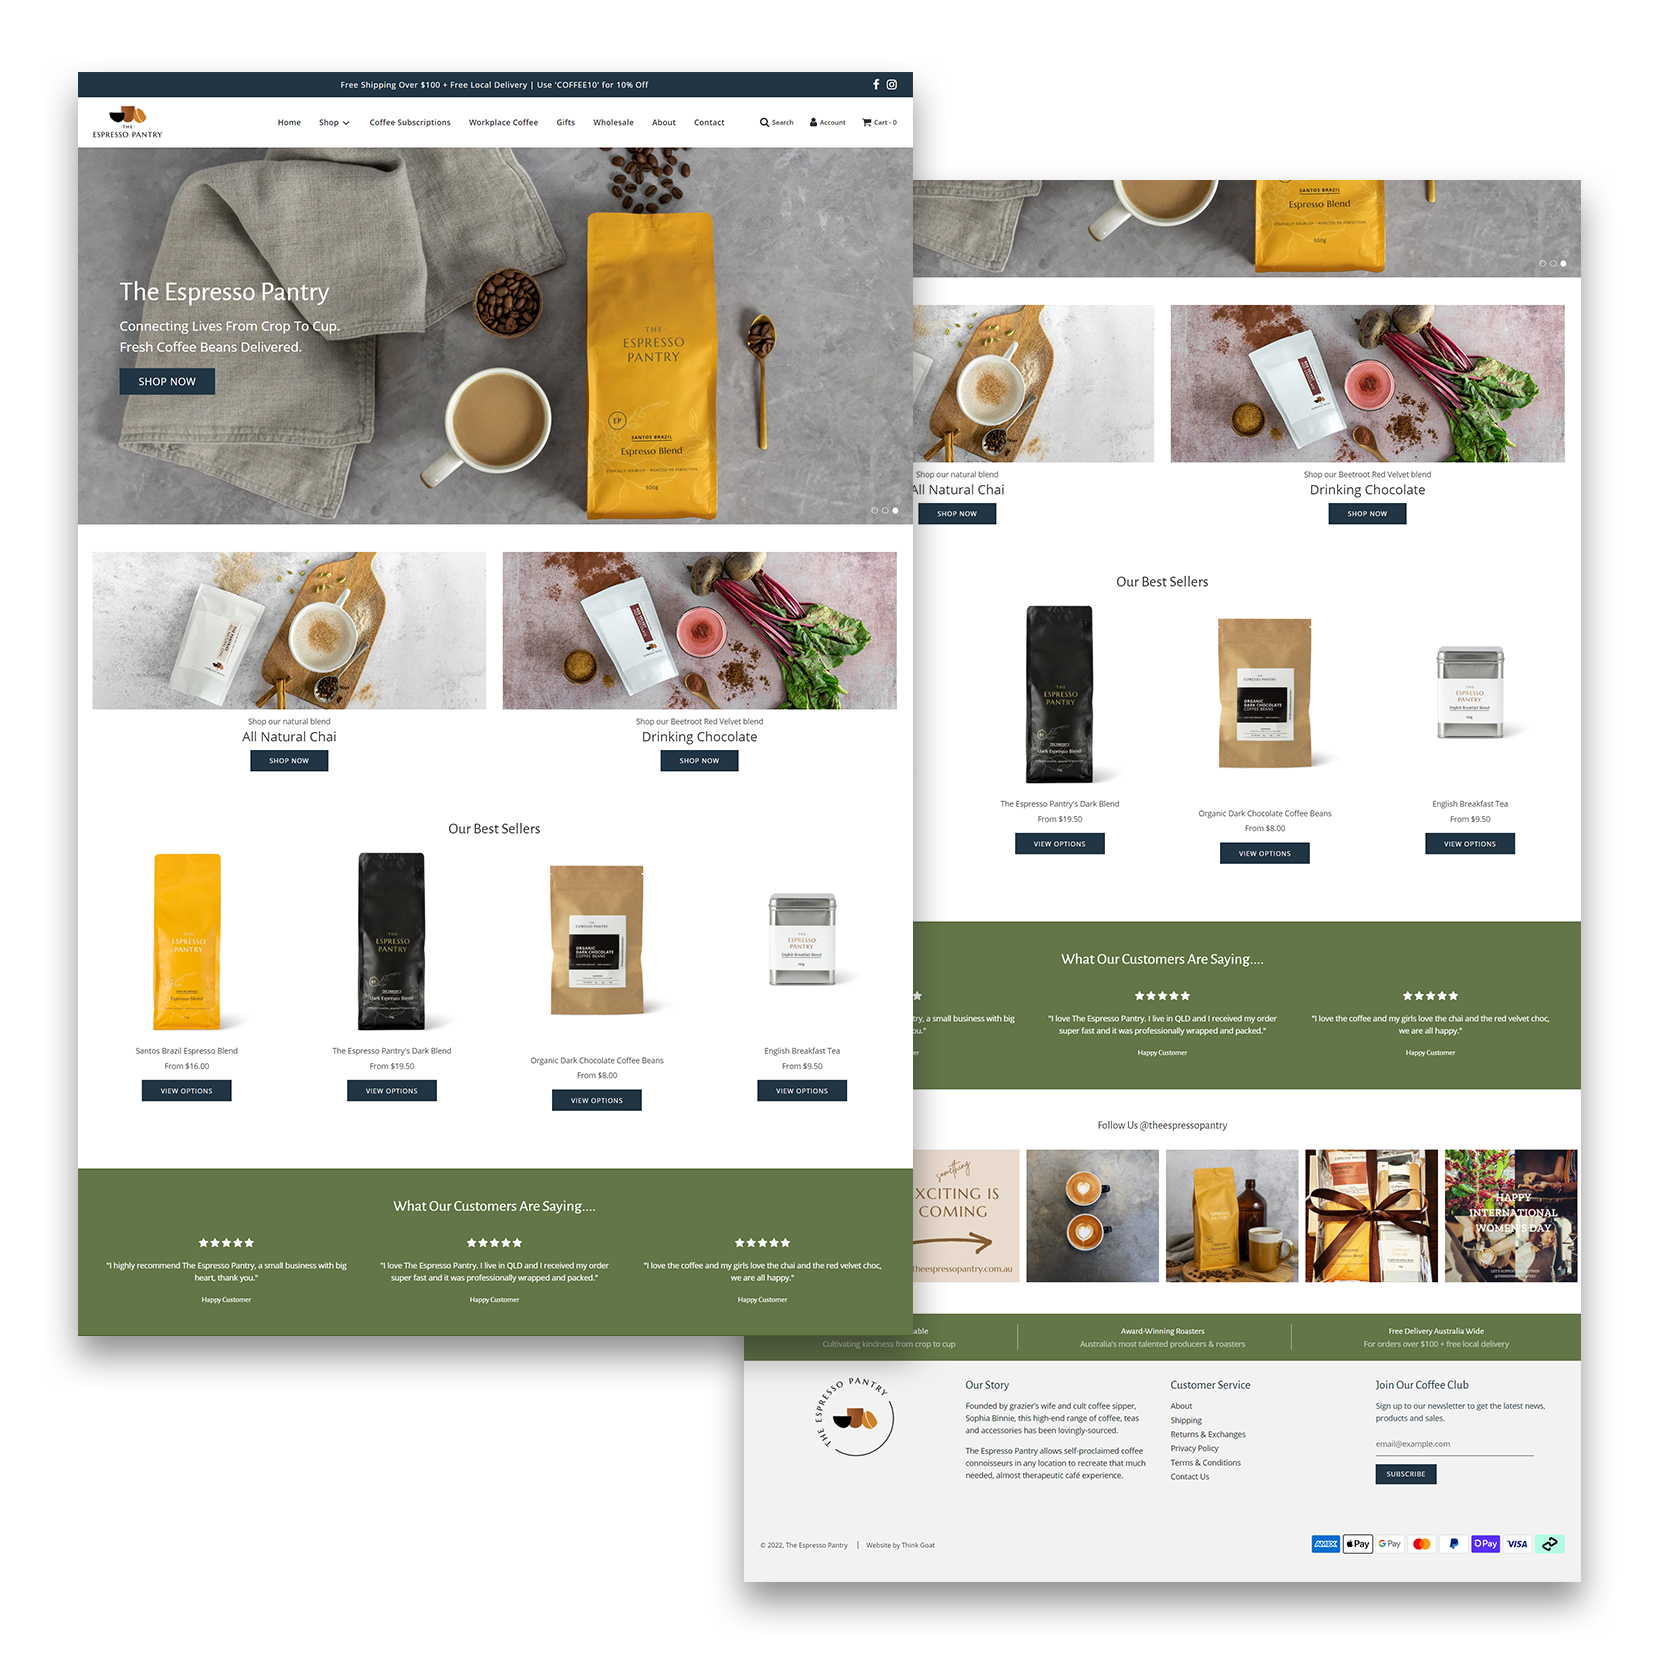 The Espresso Pantry Website design by Think Goat